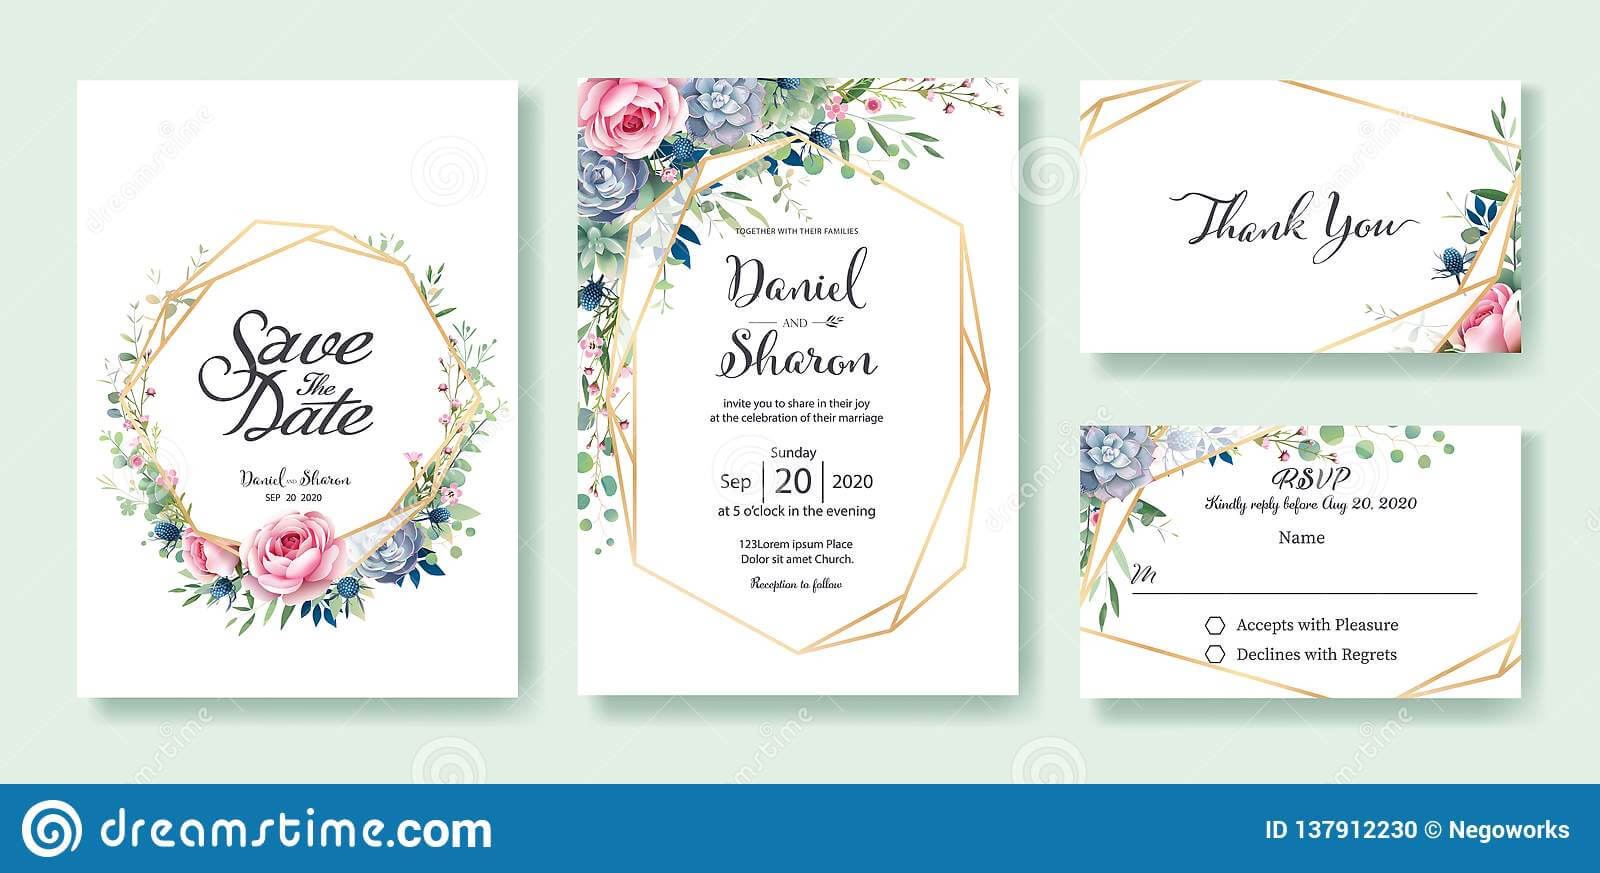 Wedding Invitation, Save The Date, Thank You, Rsvp Card With Free Printable Wedding Rsvp Card Templates